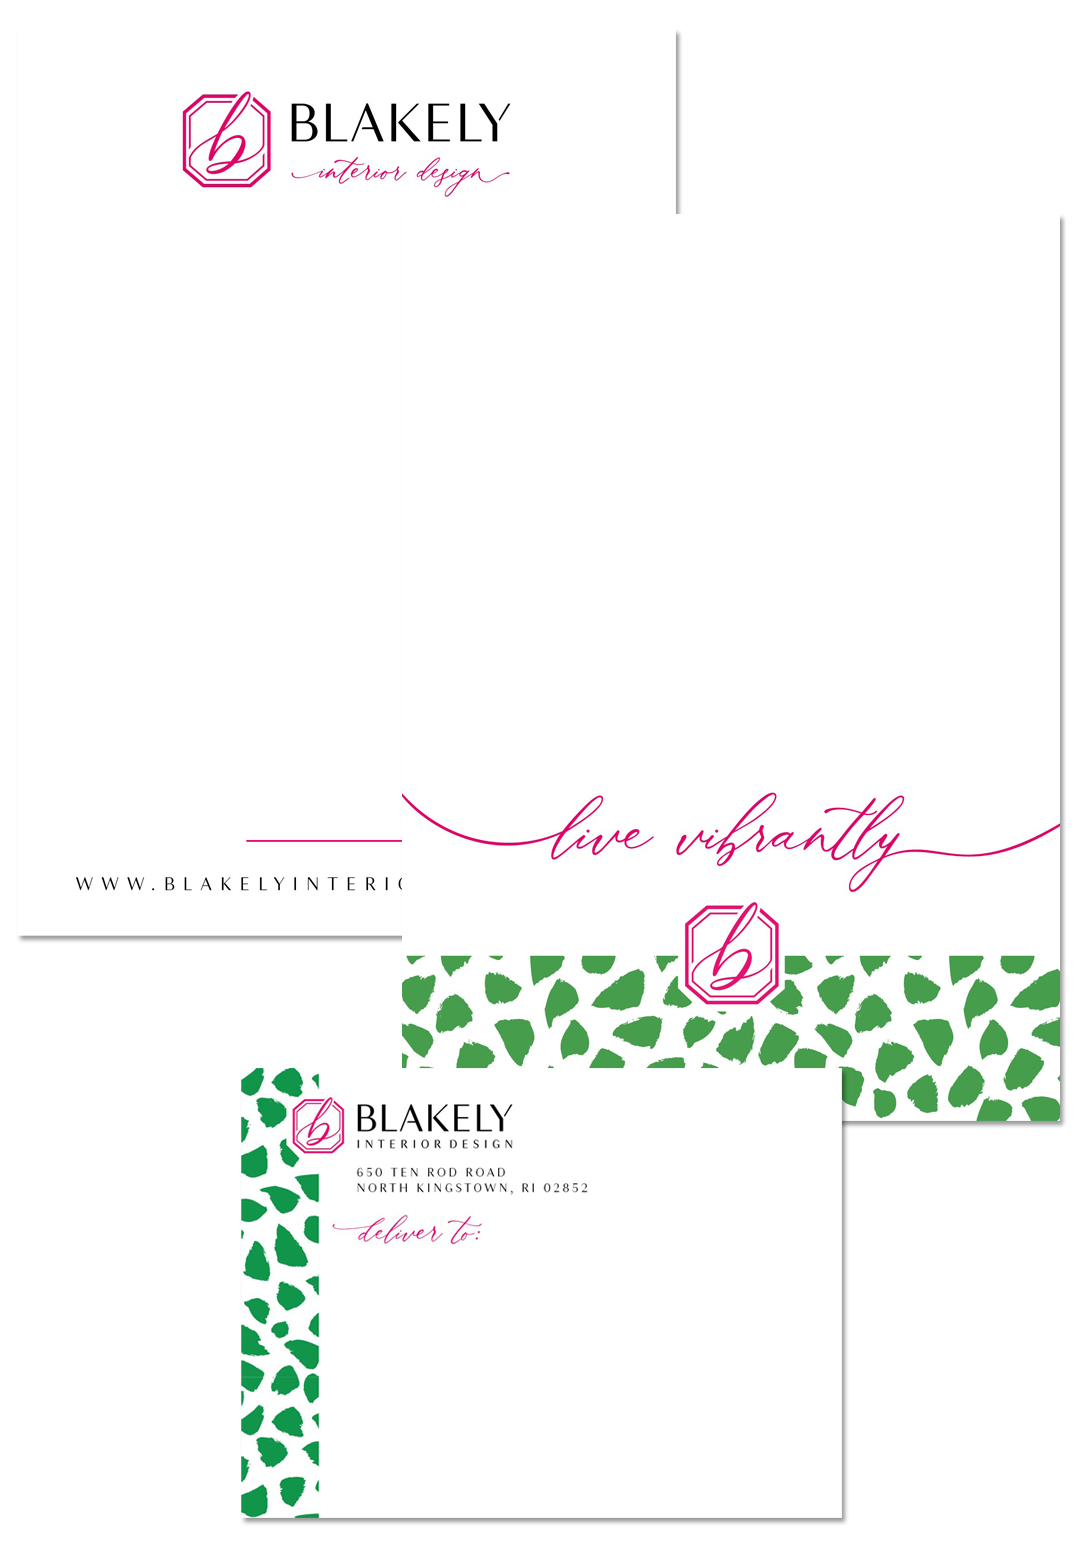 blakely interior design notecard design by pop and grey